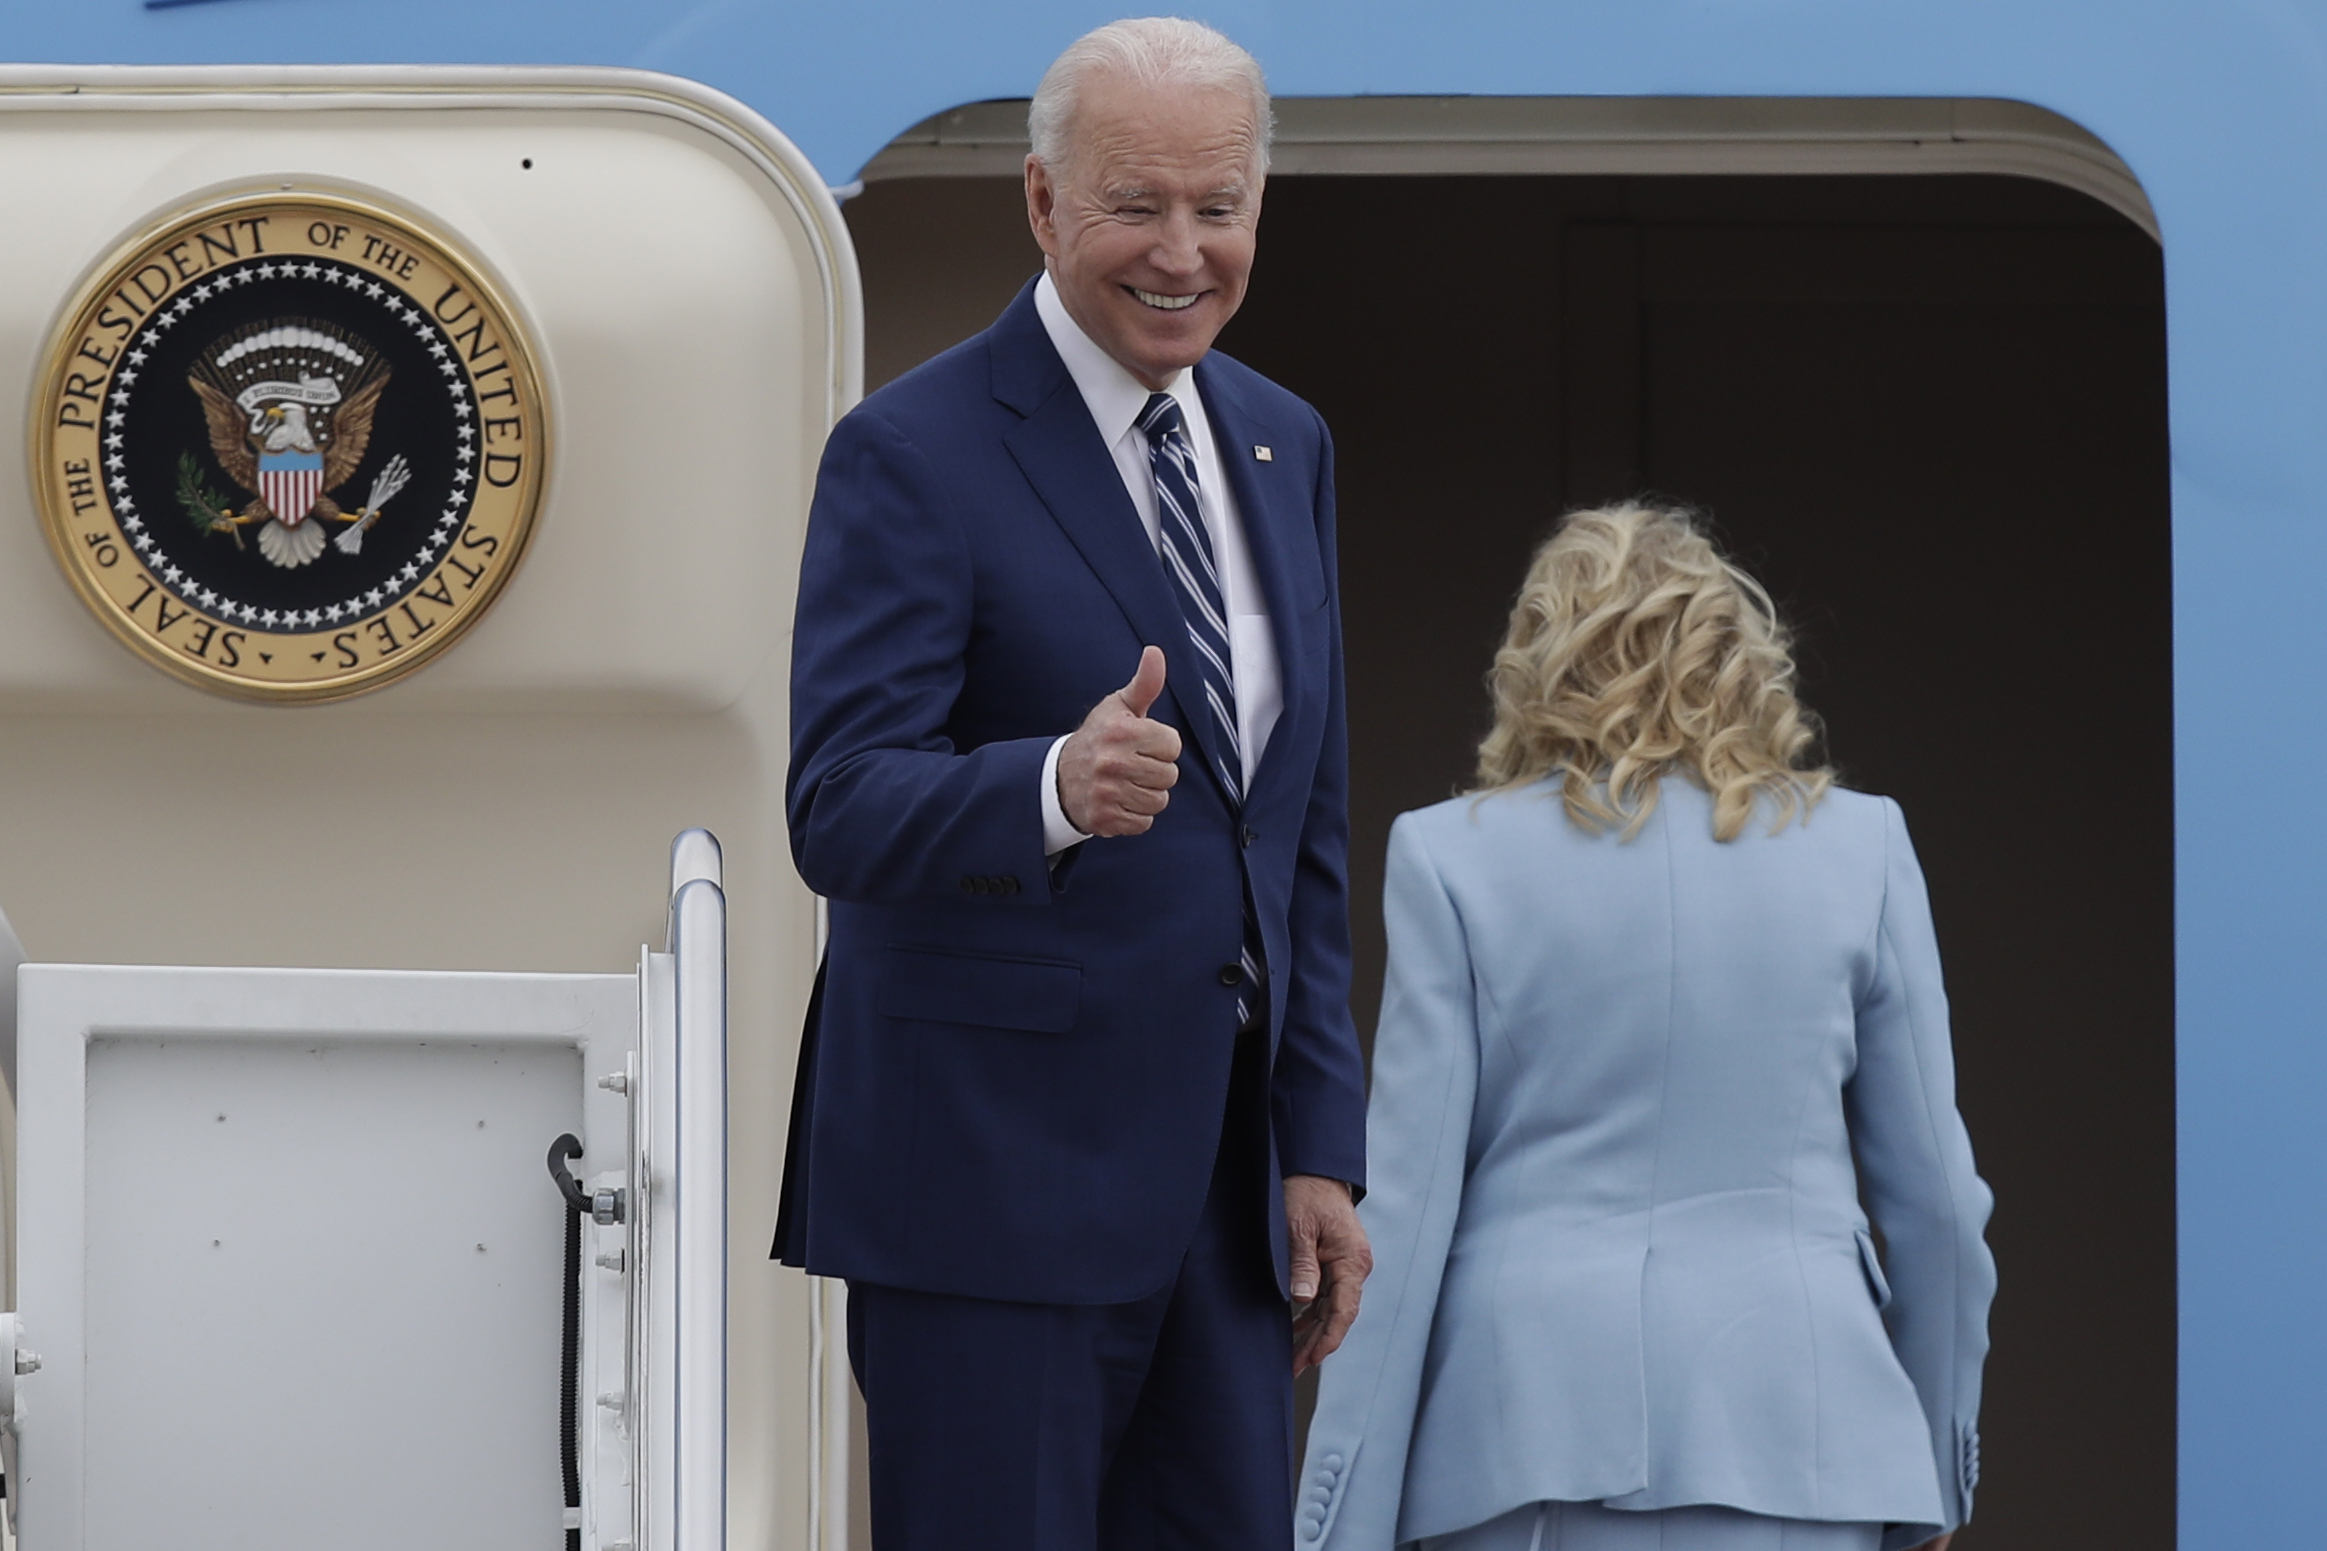 Listen: O'Reilly and Beck on the Massive Failures of the Biden Administration